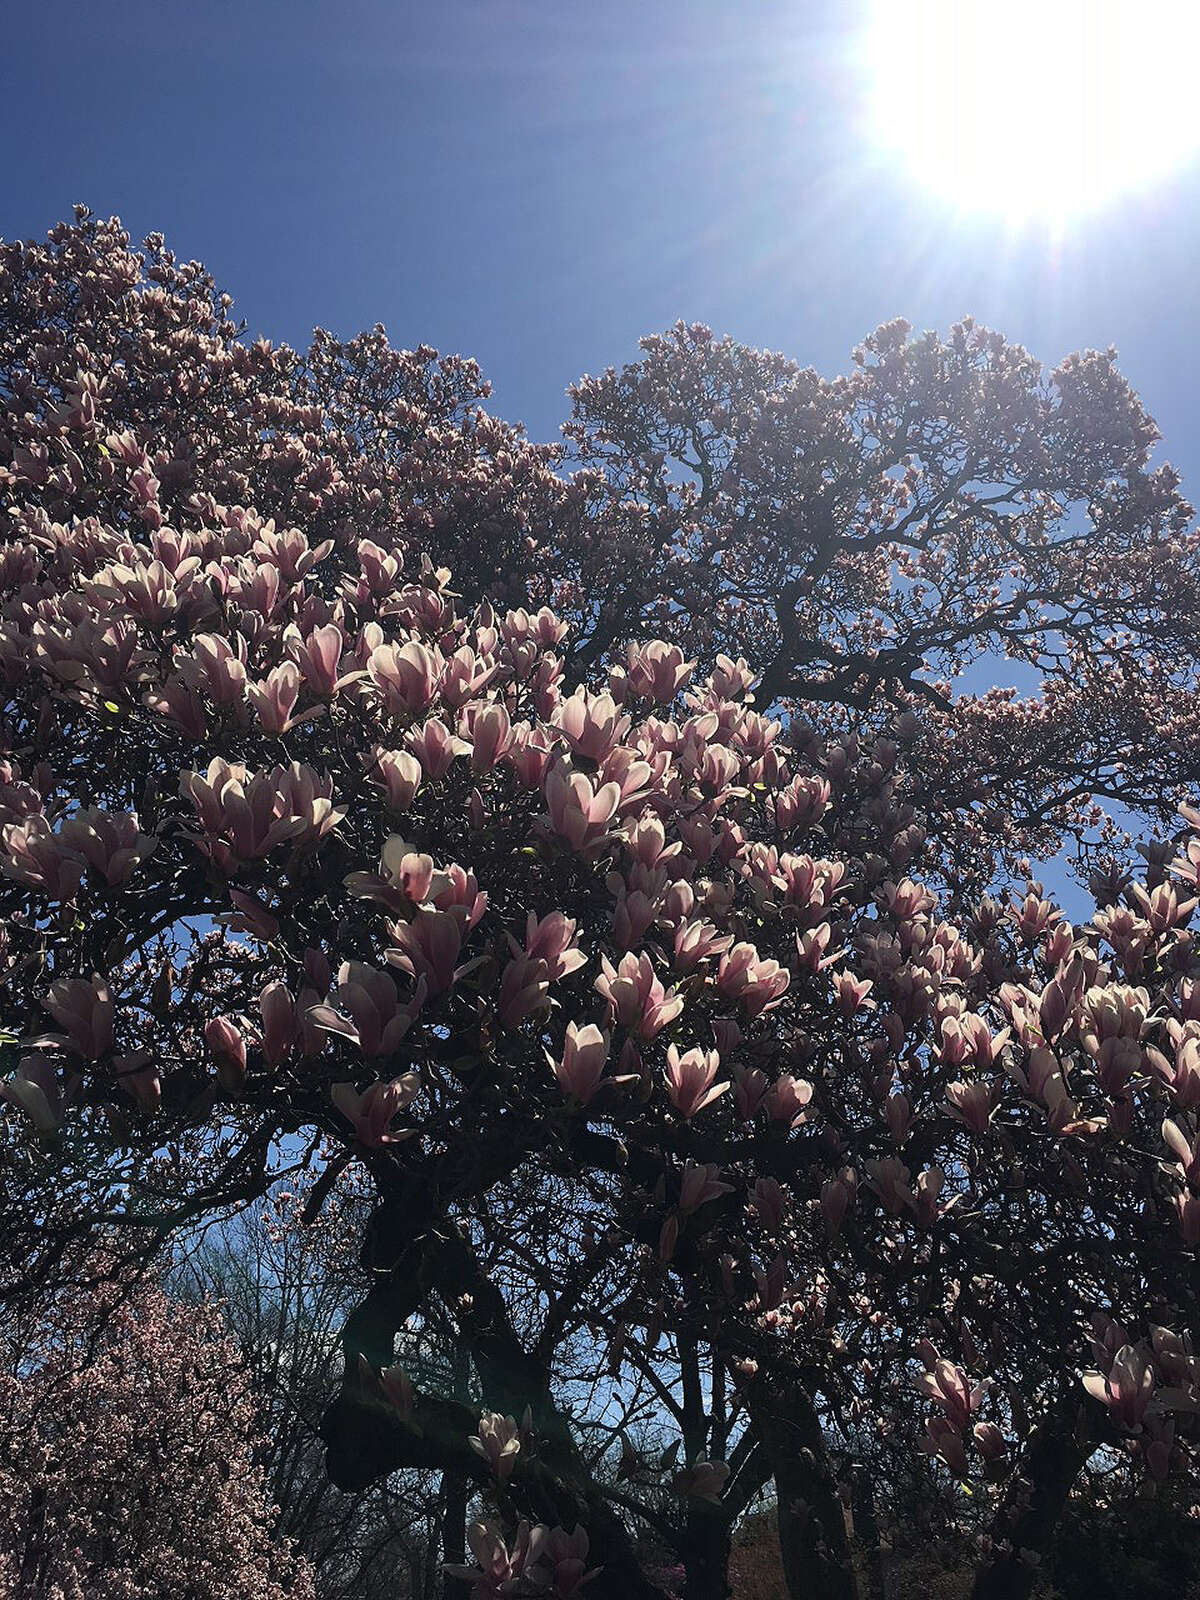 A magnolia tree blooms in the sunshine.